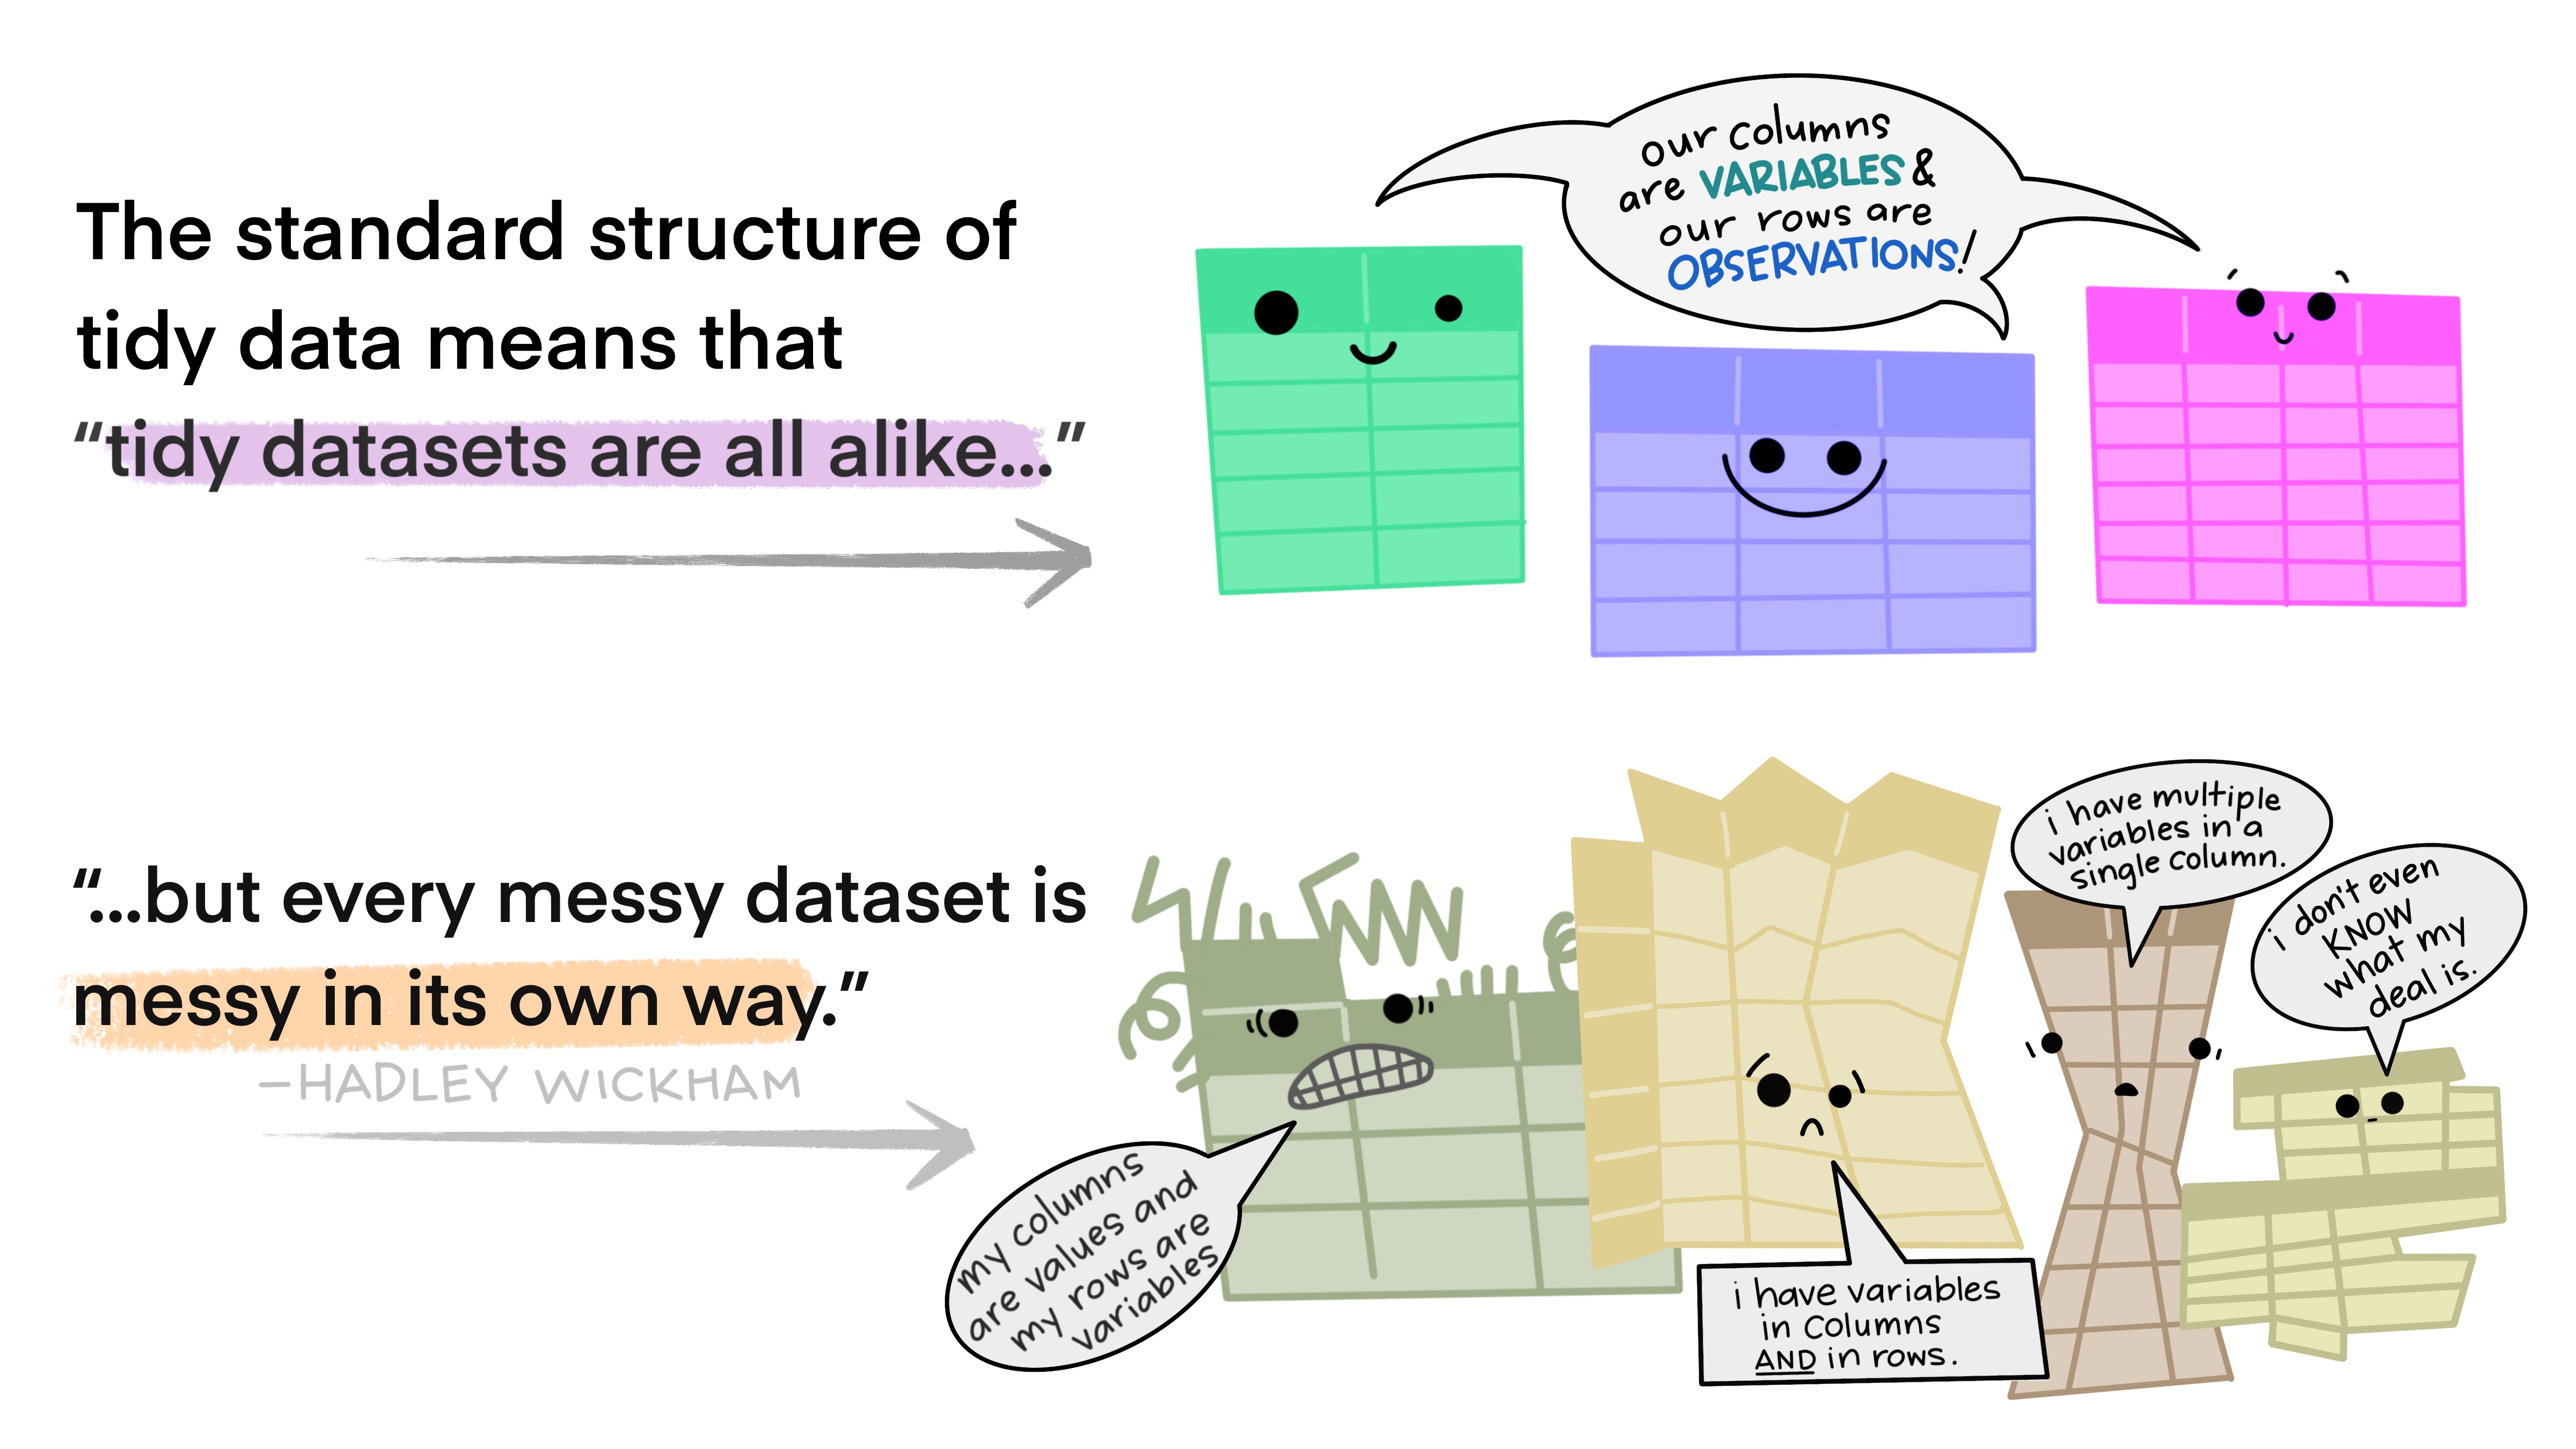 Illustrations from the Openscapes blog Tidy Data for reproducibility, efficiency, and collaboration by Julia Lowndes and Allison Horst